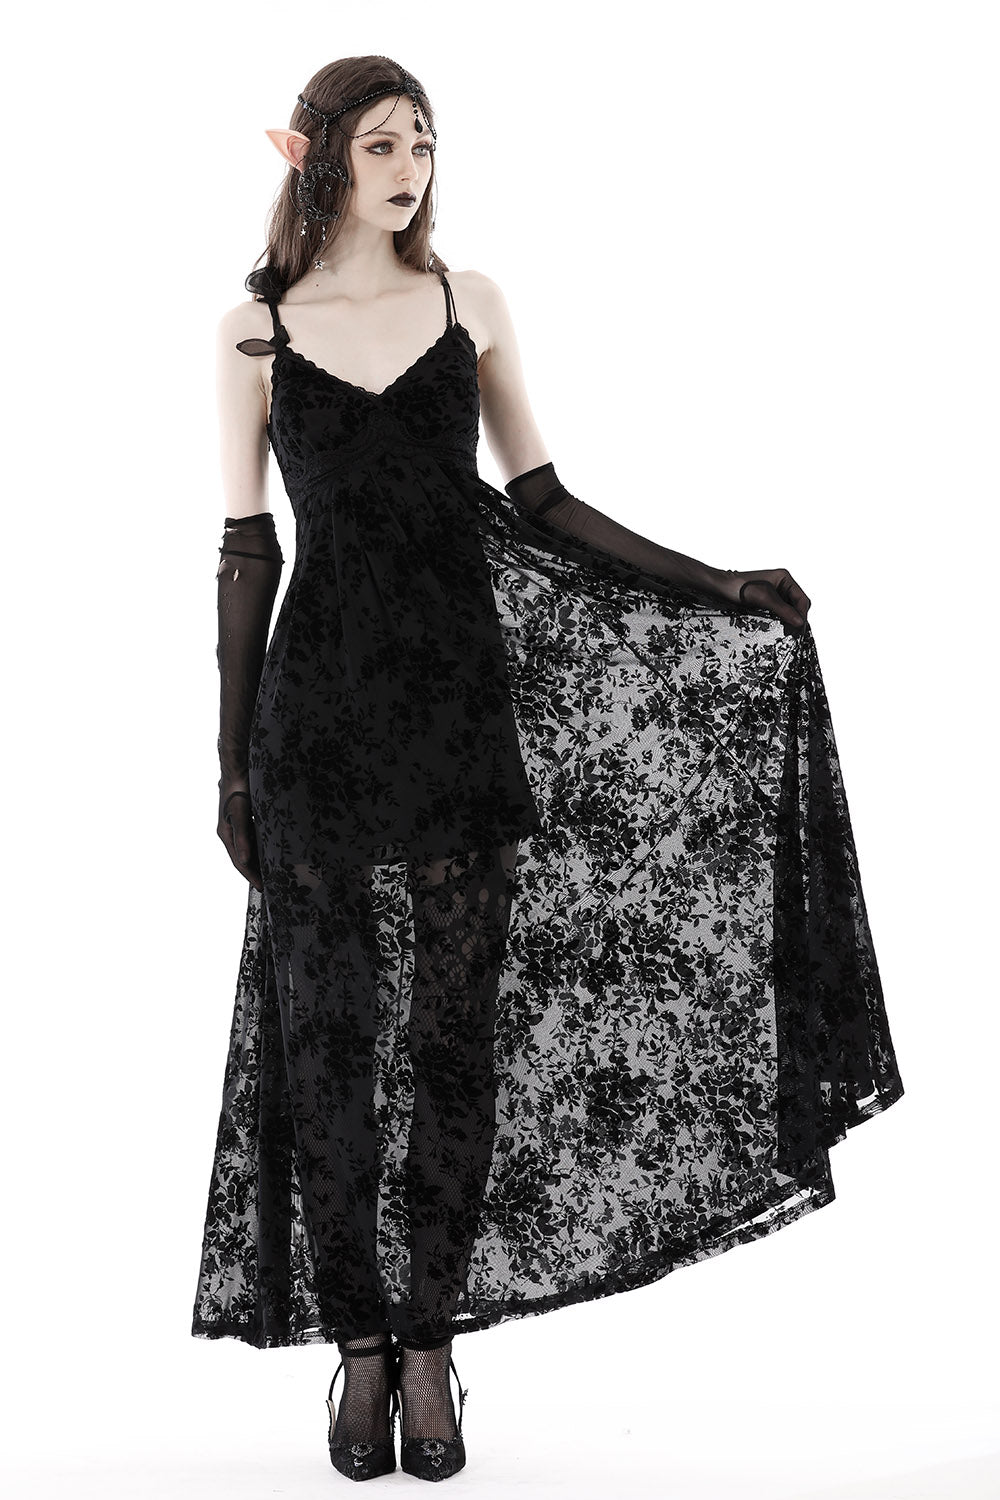 womens gothic lace dress with mesh overlay